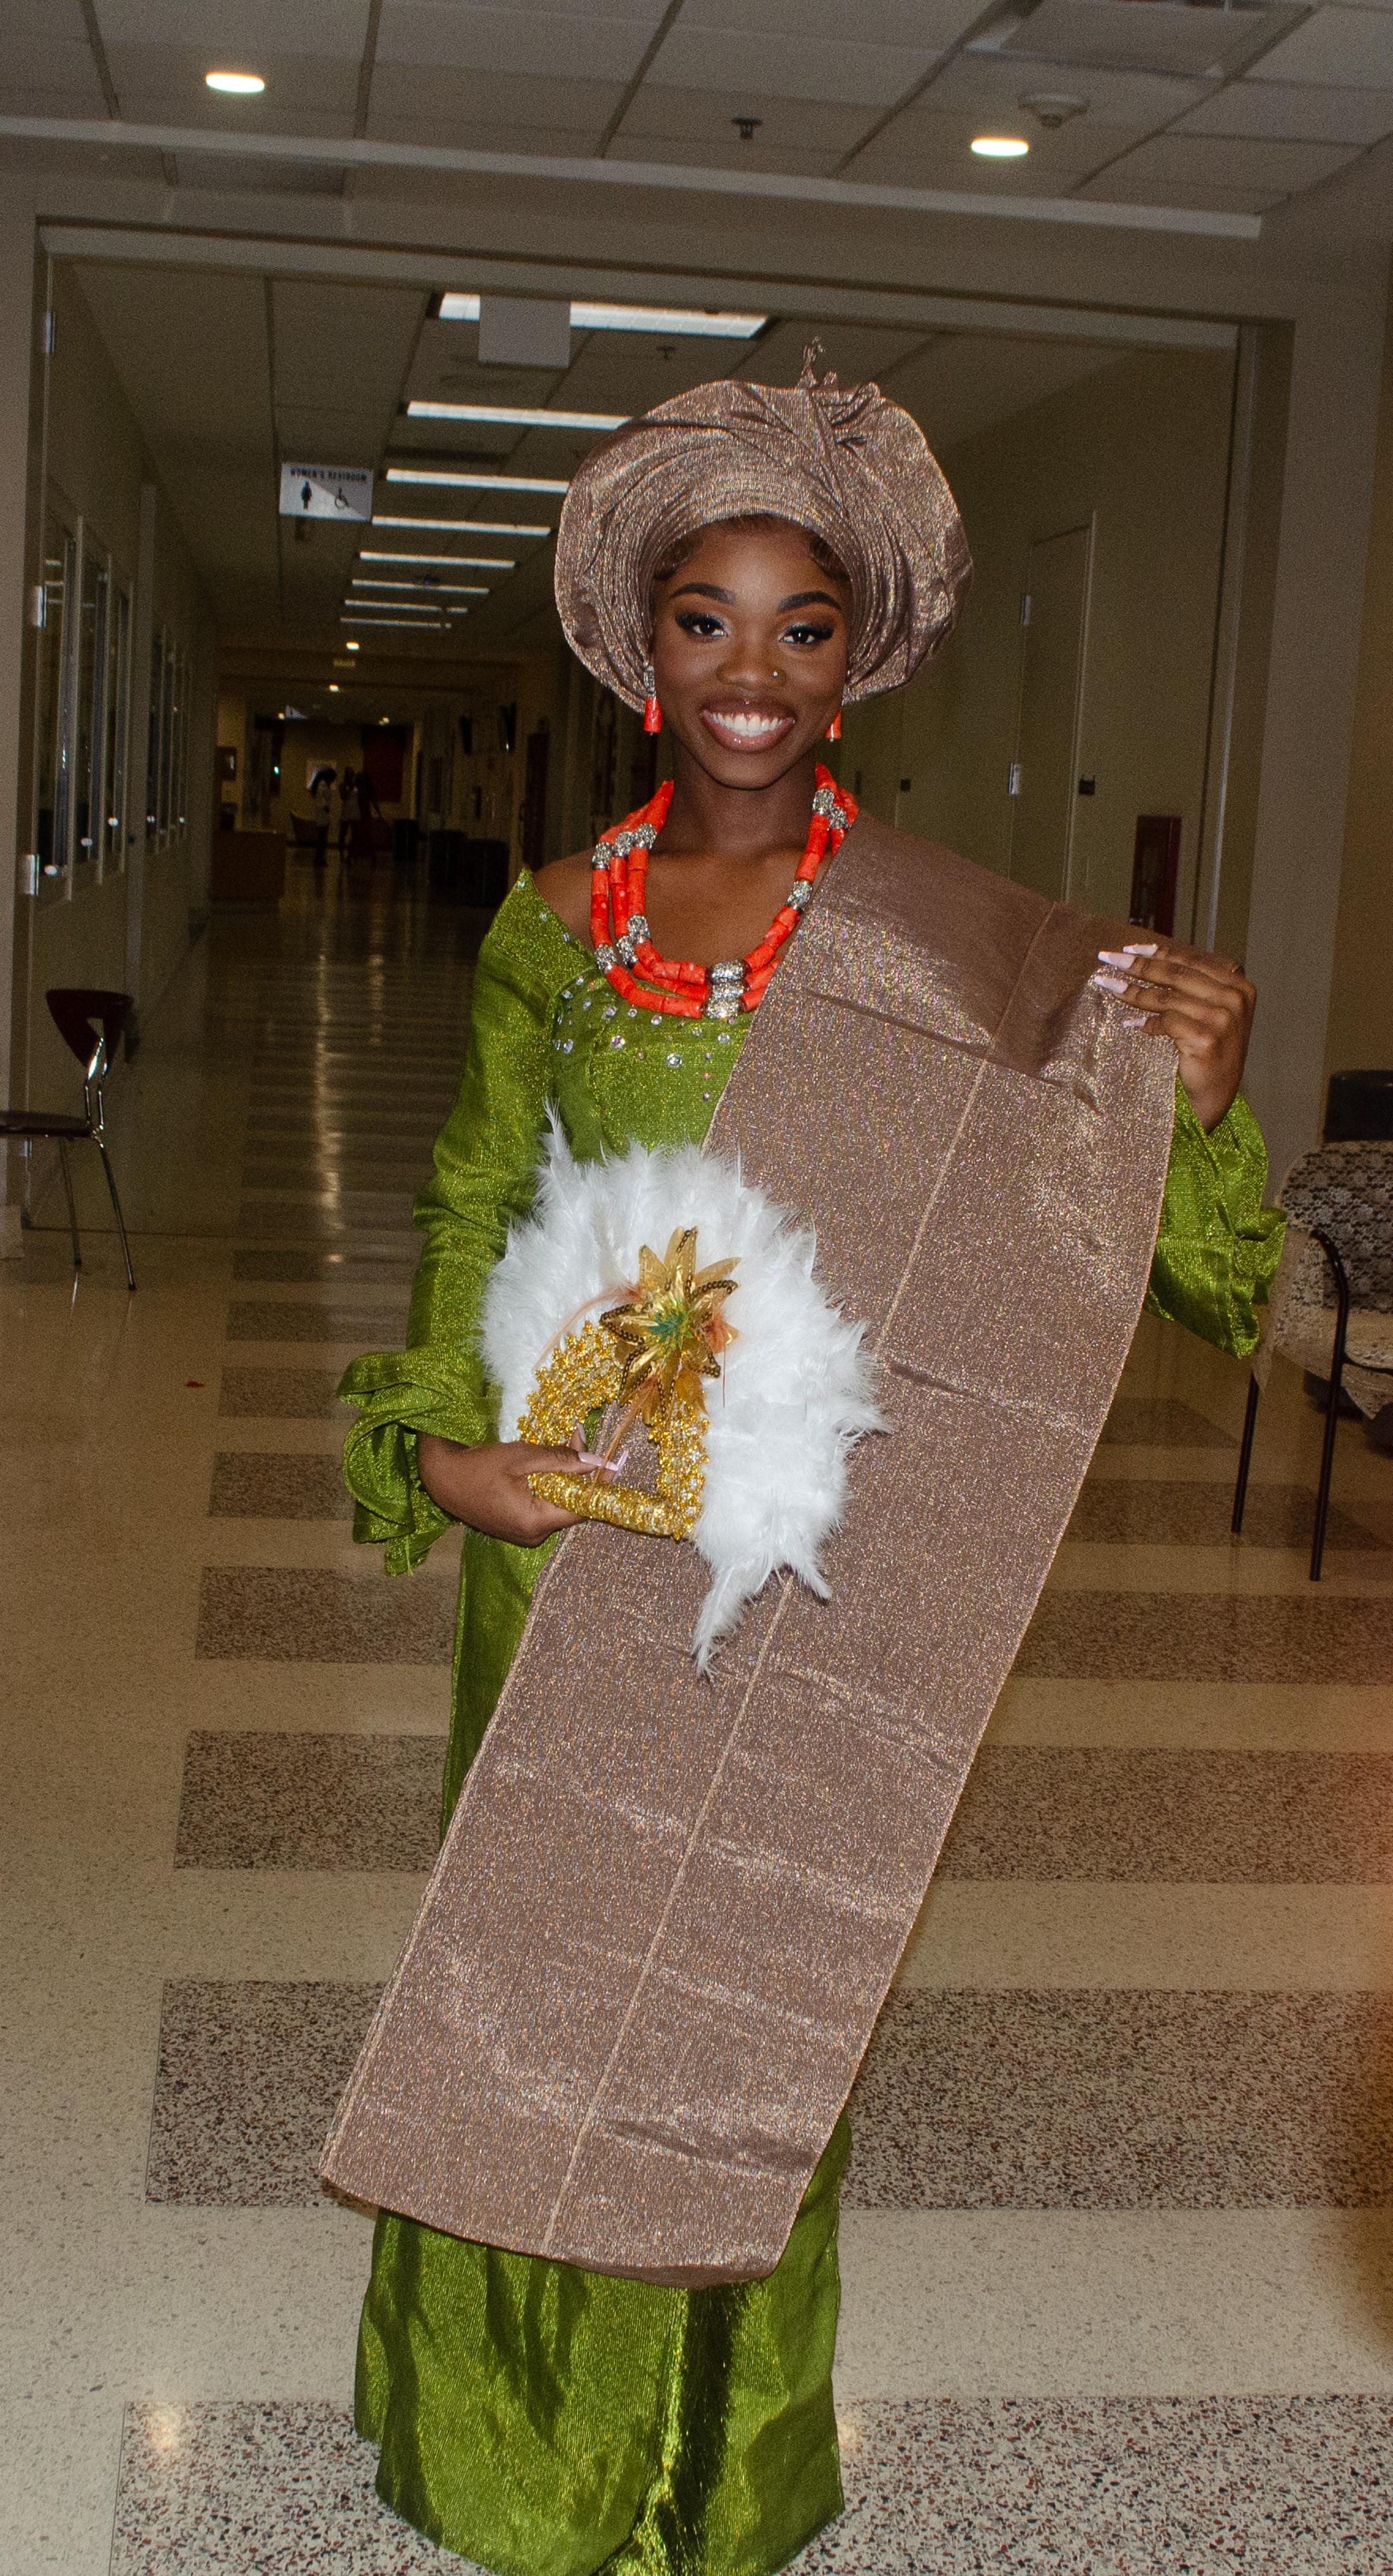 Sharon Idowu, the fourth contestant at the Fall Ball.